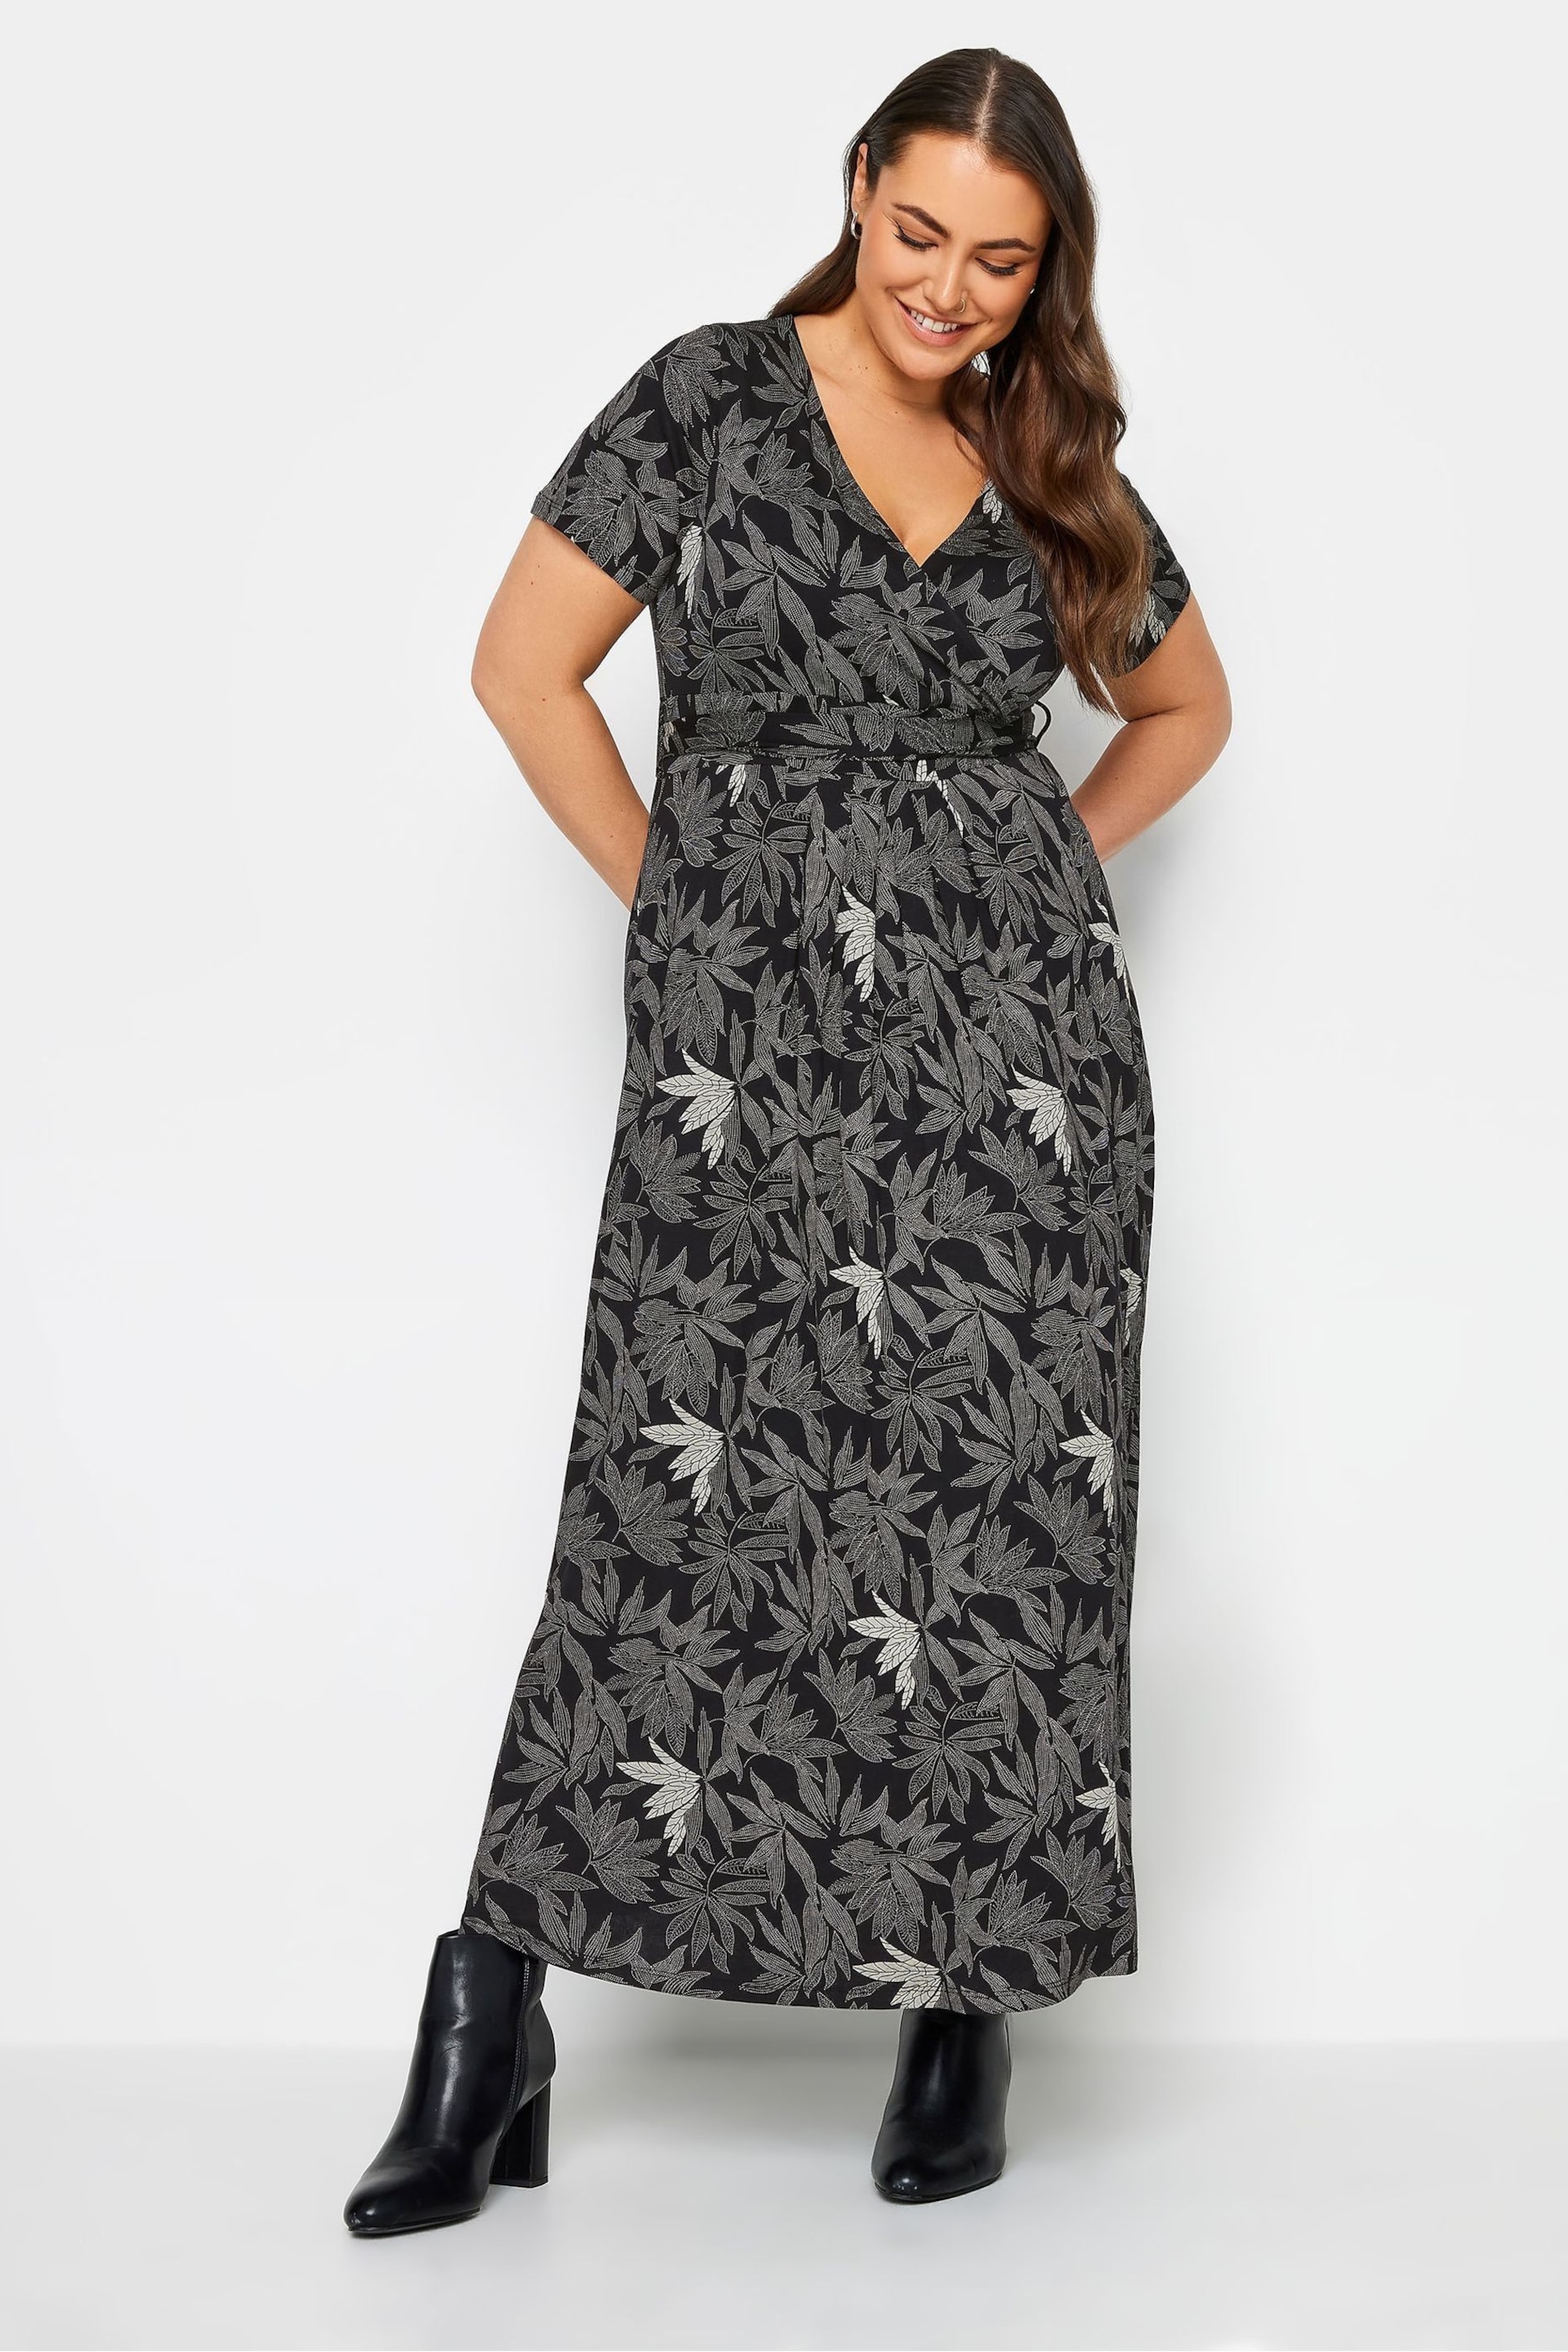 Yours Curve Black Grey Maxi Wrap Dress - Image 1 of 4